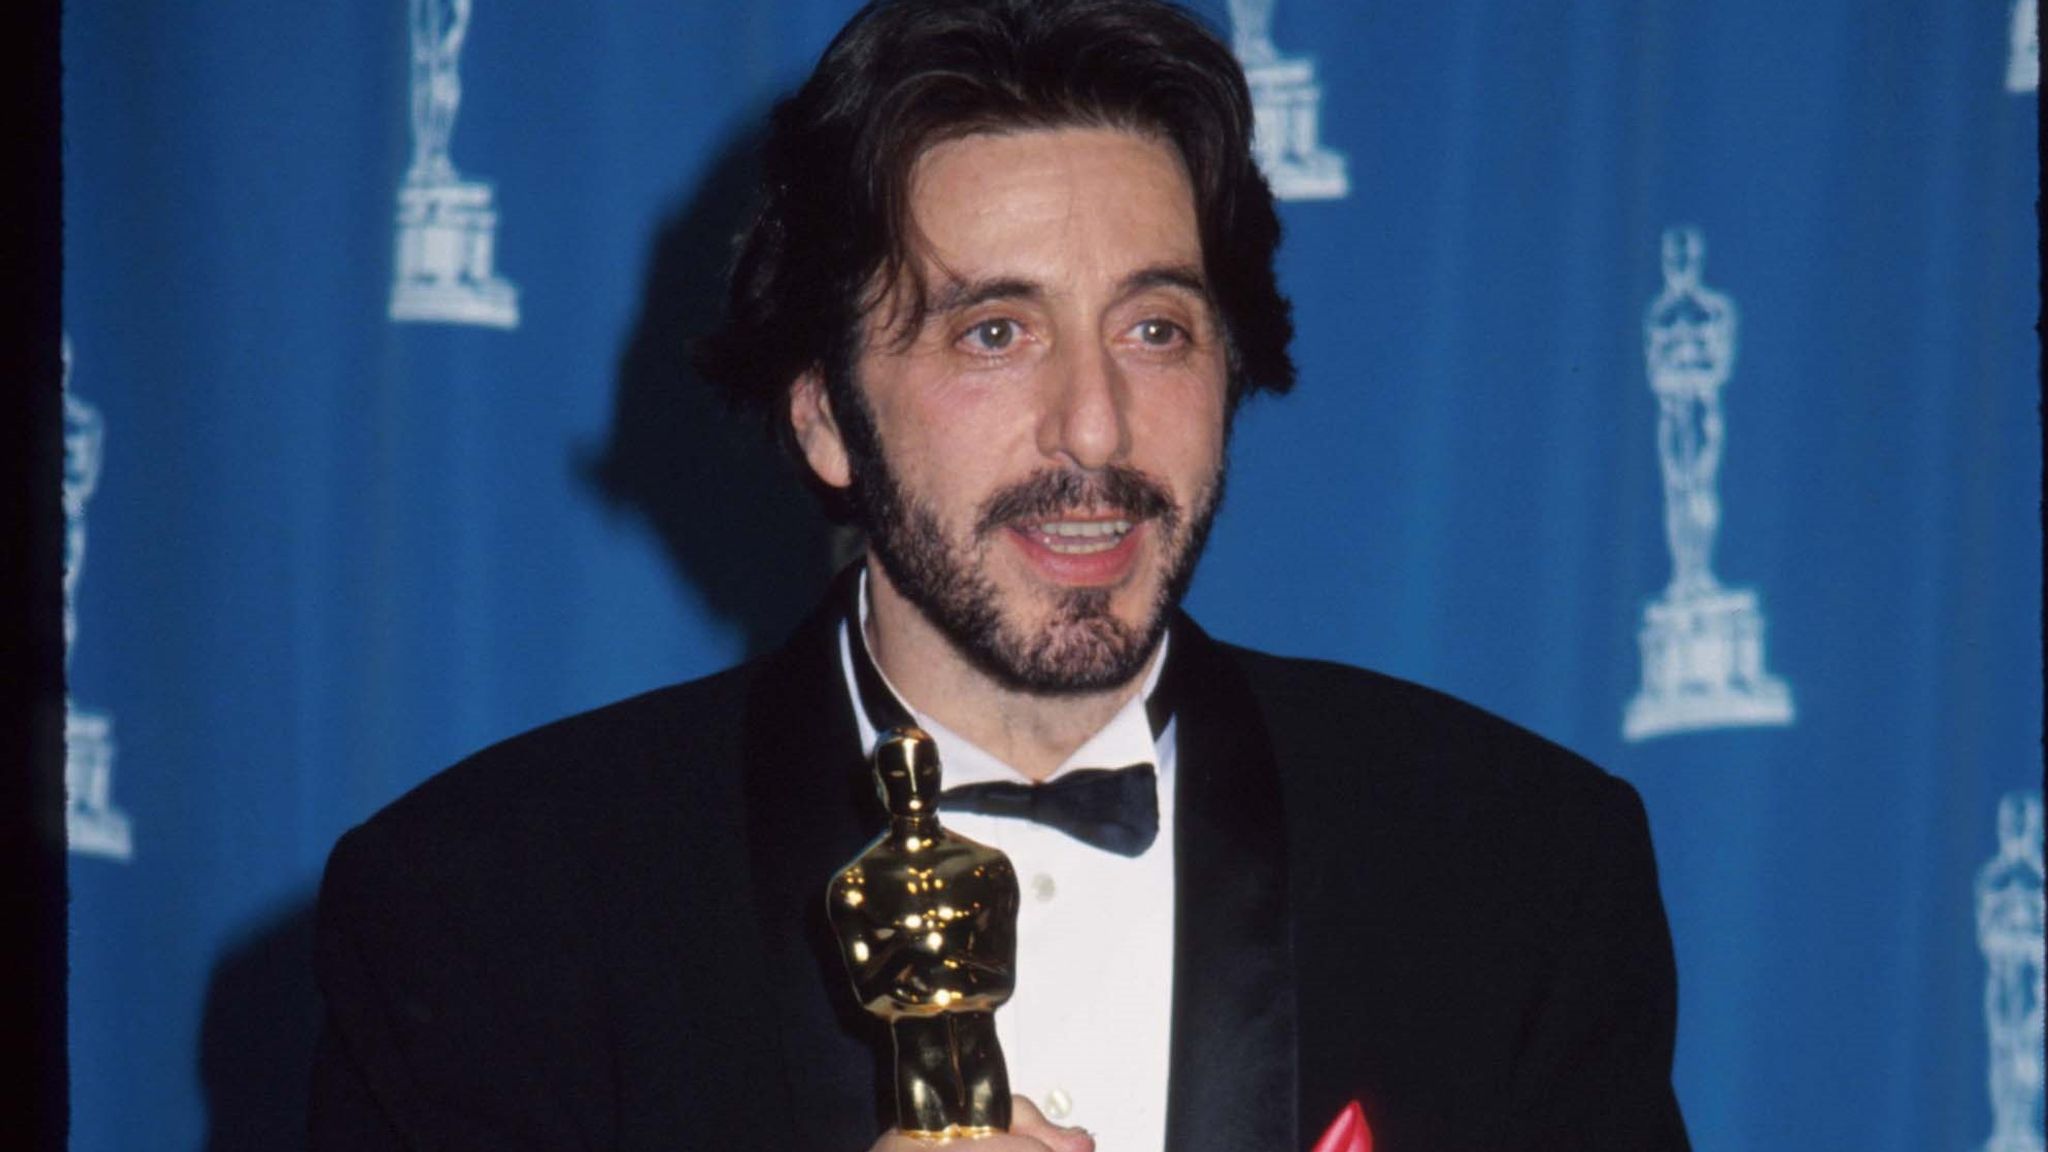 Al Pacino You Never Quite Learn How To Handle An Oscar Nomination Ents Arts News Sky News